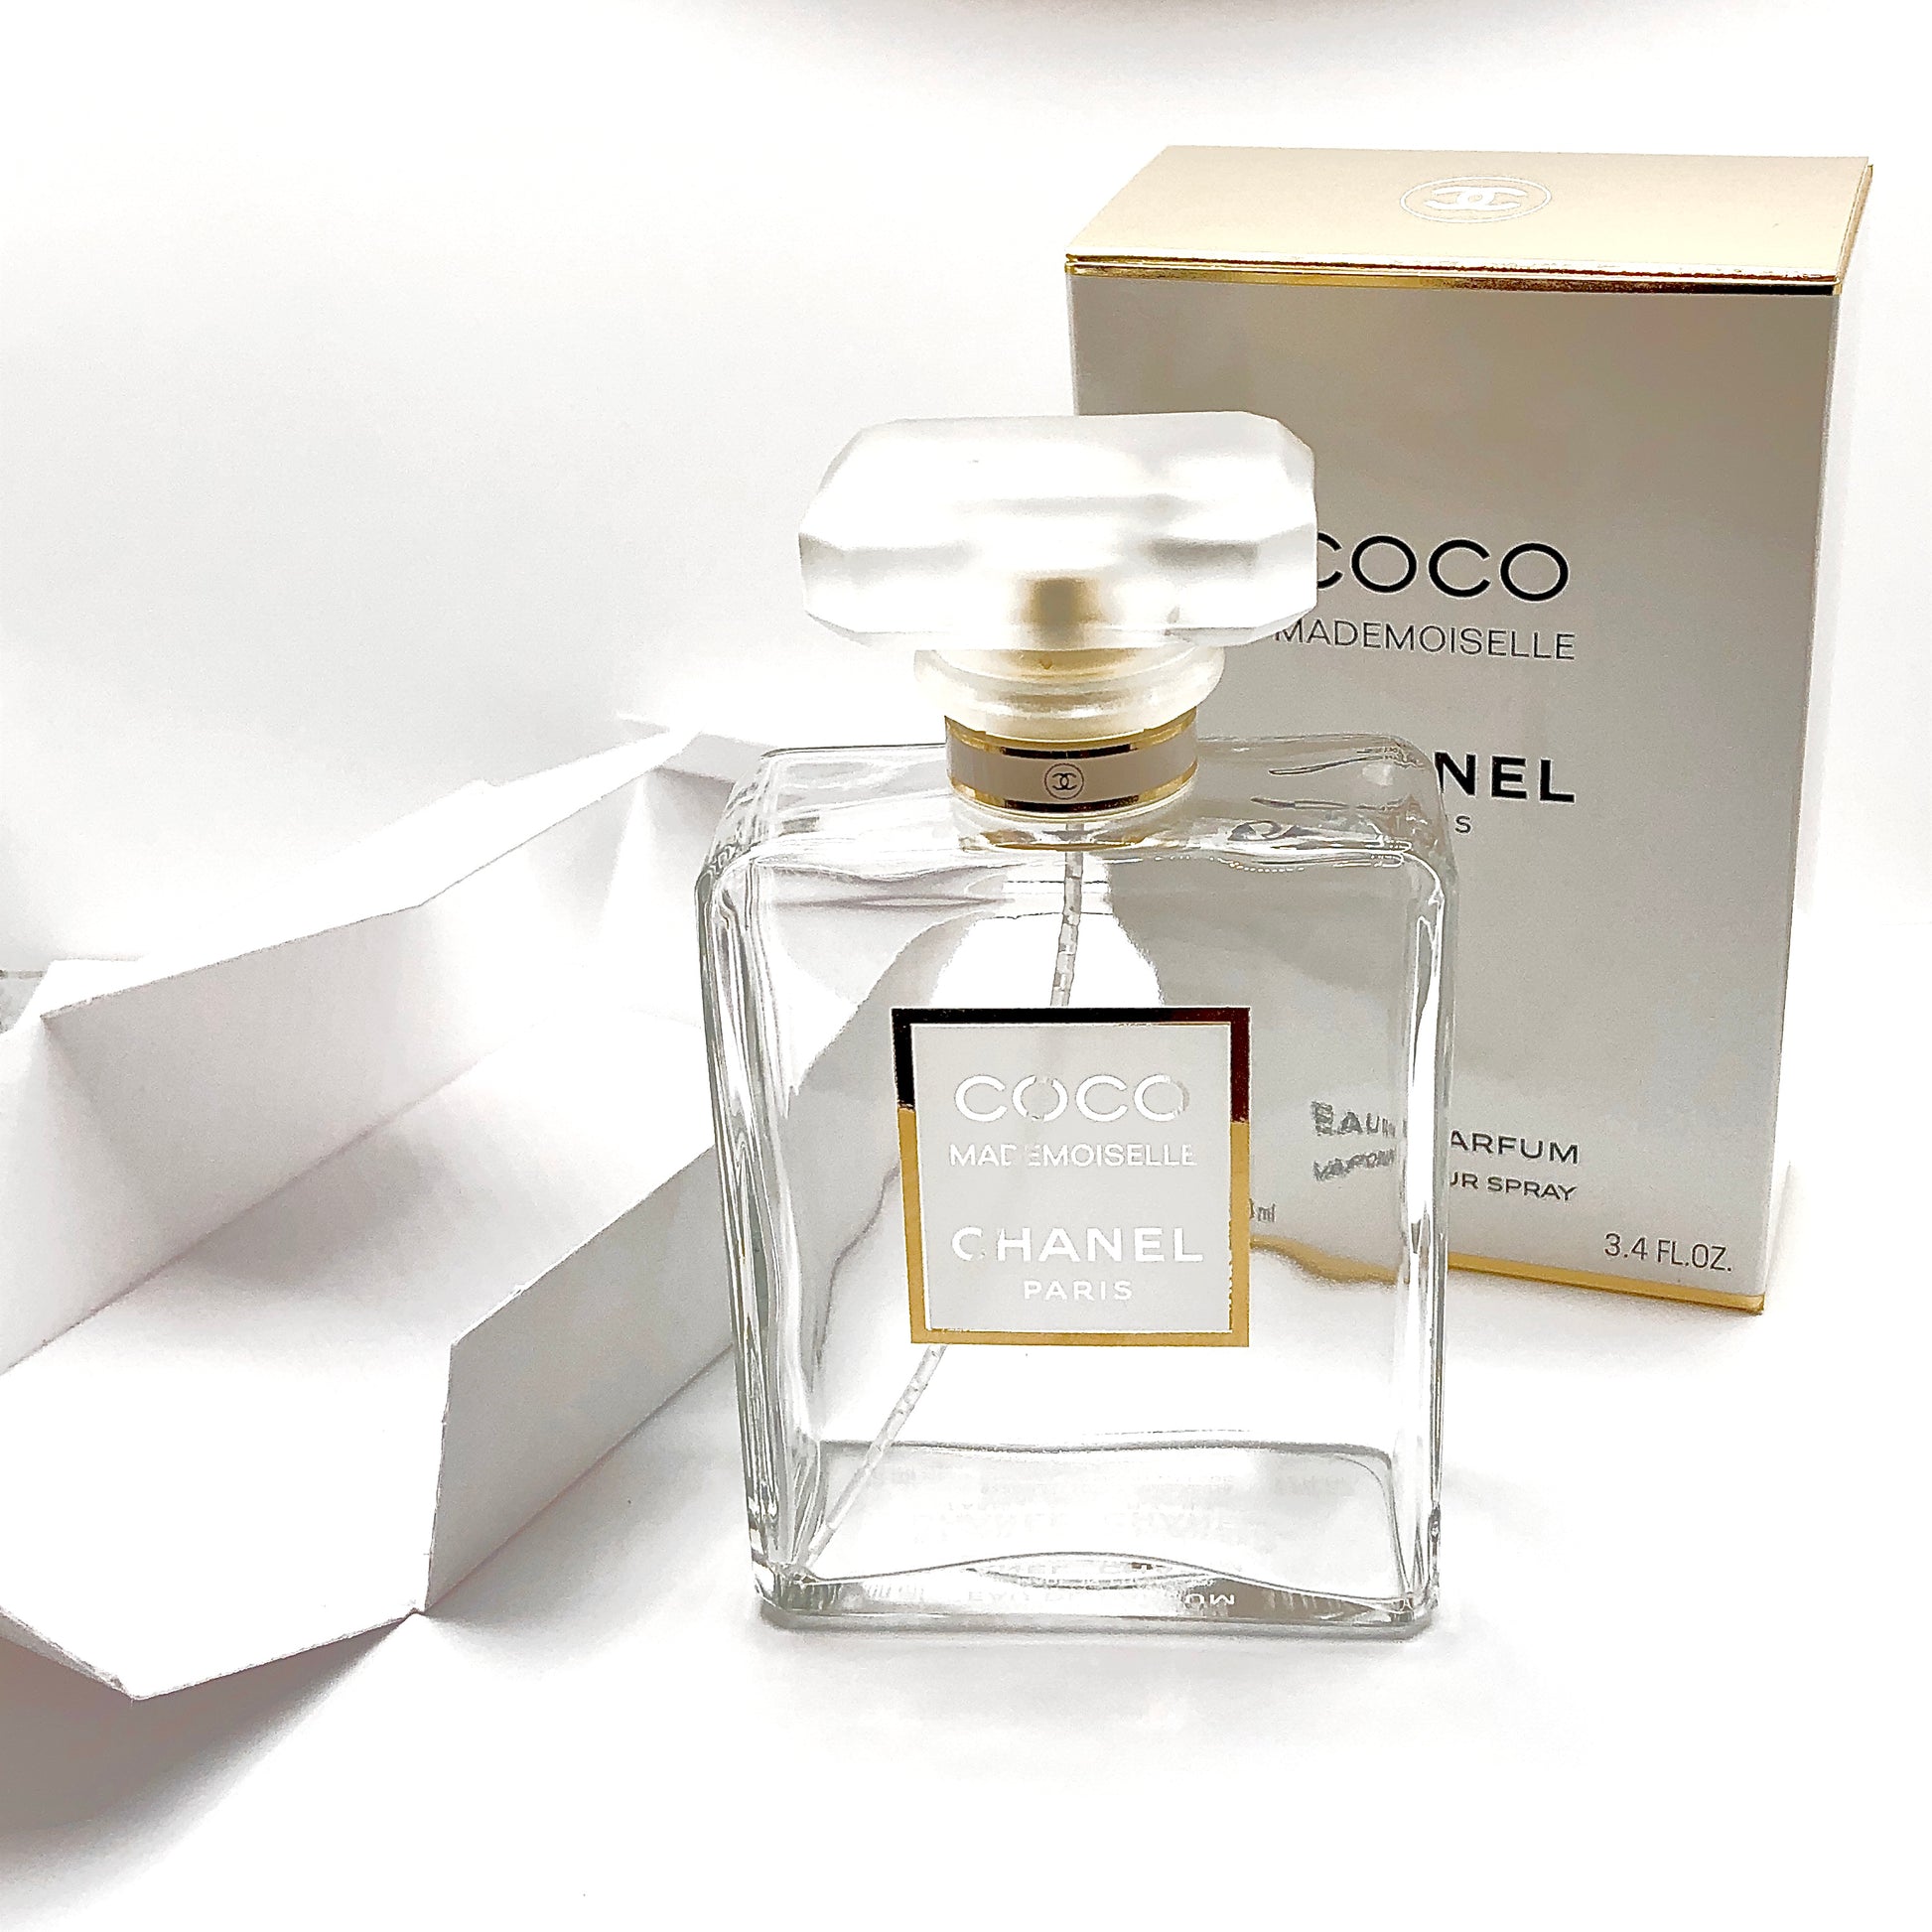 4 Empty Chanel CoCo Mademoiselle Perfume Bottles 3.4oz Movie Props - Fragrance Store Display Decor